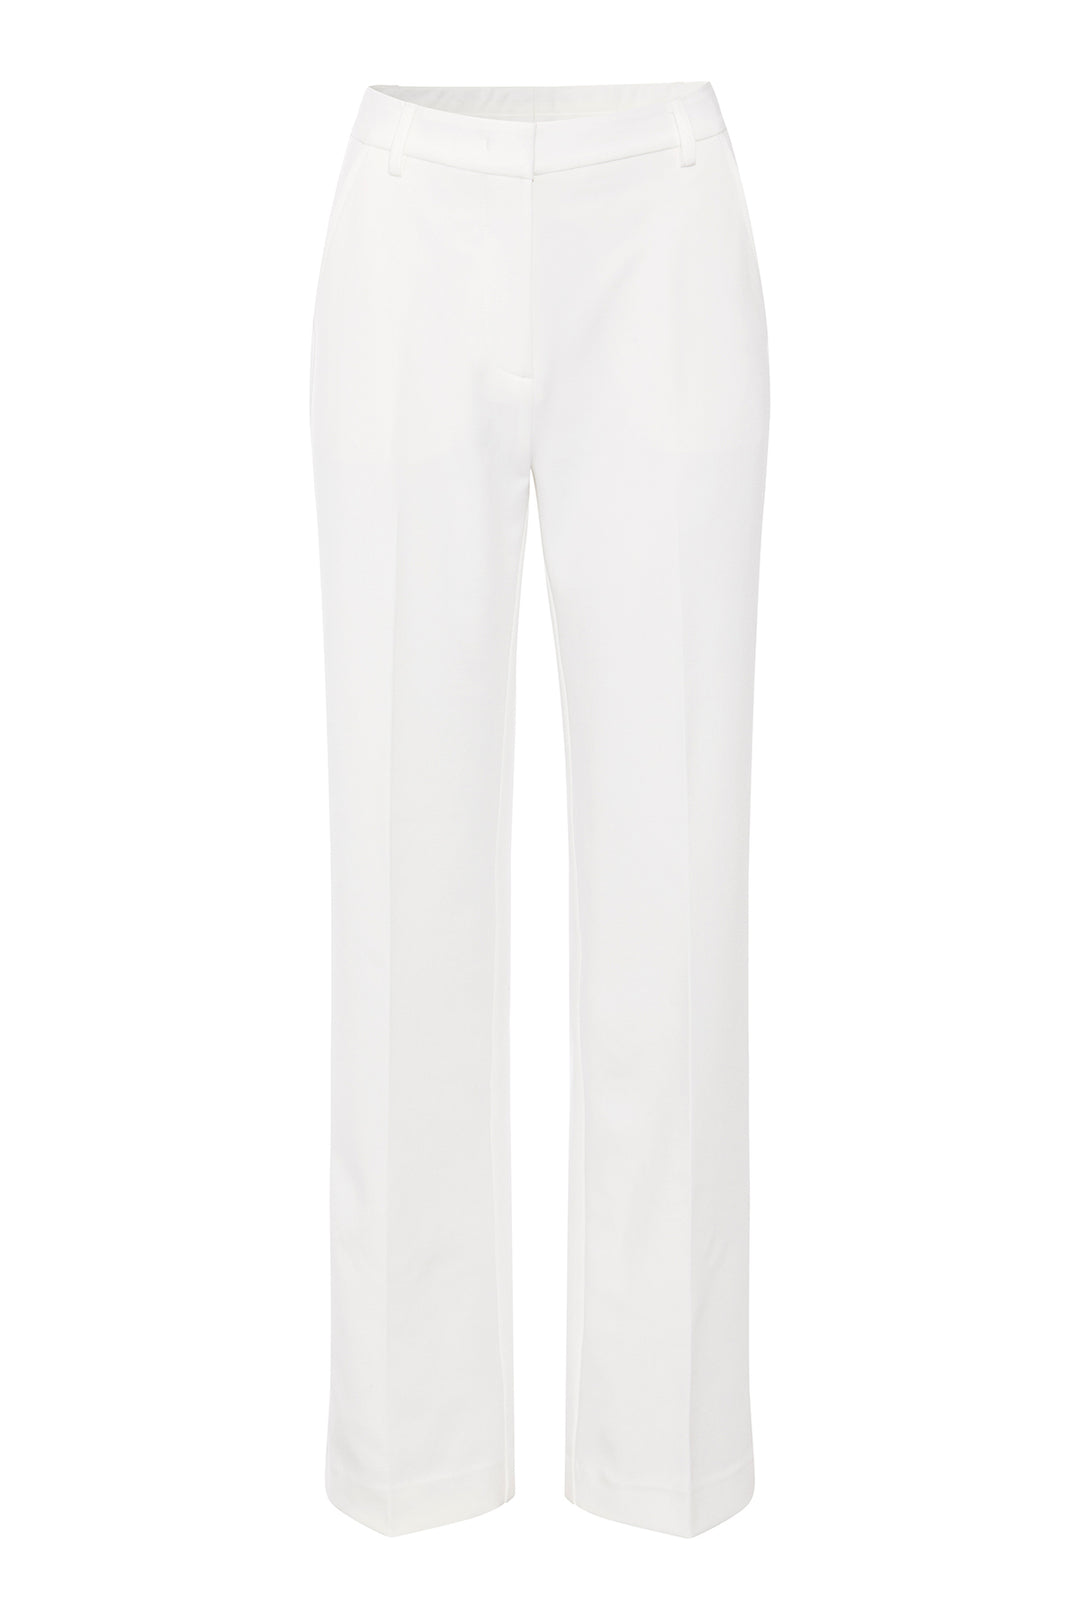 Heartmade Noma pants HM TROUSERS 104 Off White